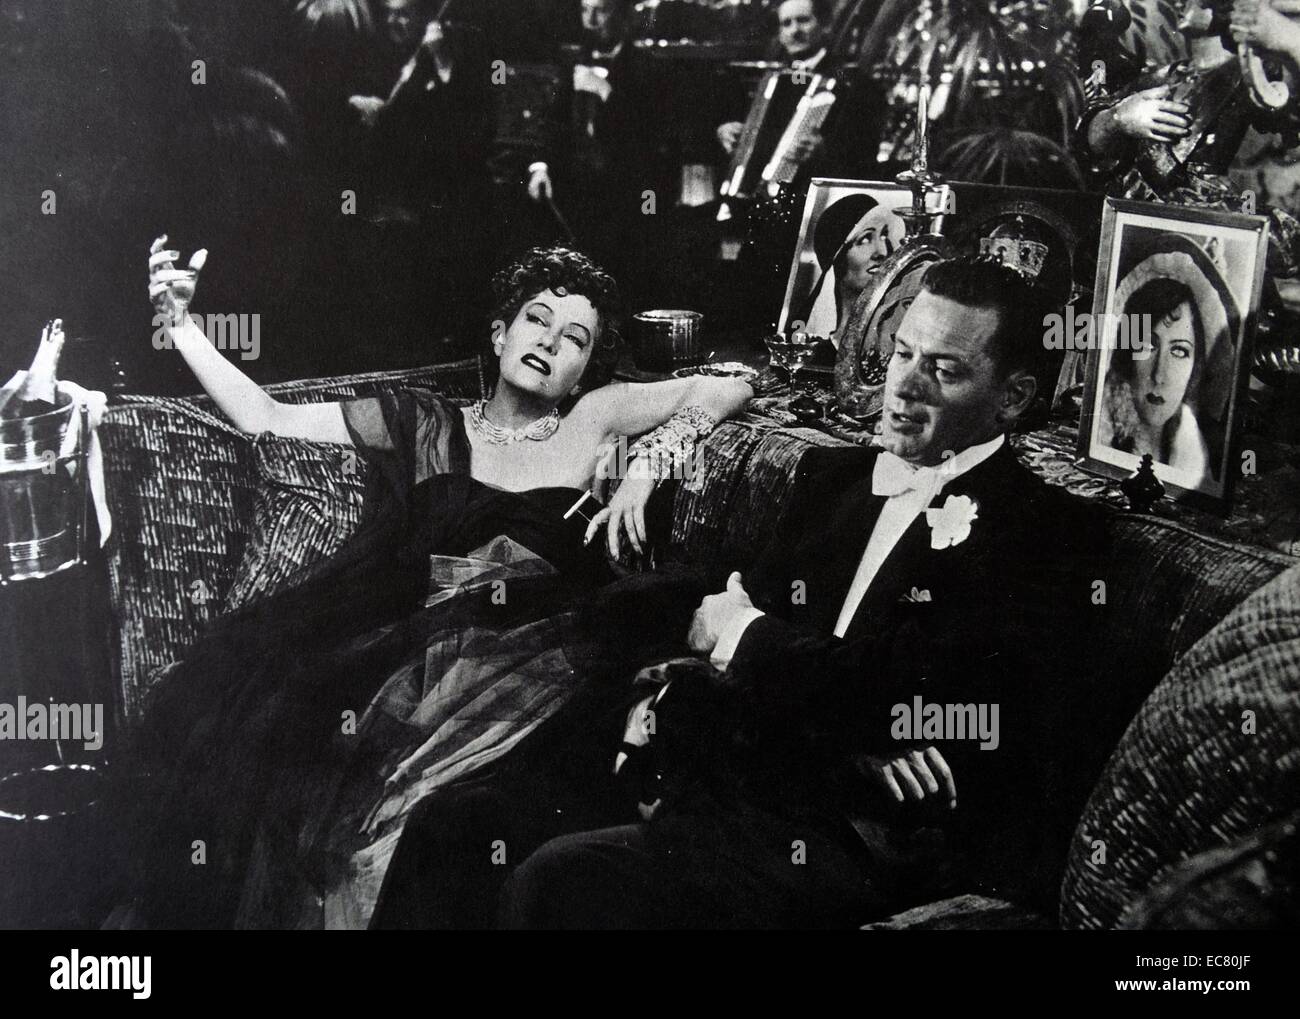 Sunset Boulevard  1950 American film noir directed and co-written by Billy Wilder. stars William Holden as Joe Gillis, an unsuccessful screenwriter, and Gloria Swanson as Norma Desmond, a faded silent movie star Stock Photo